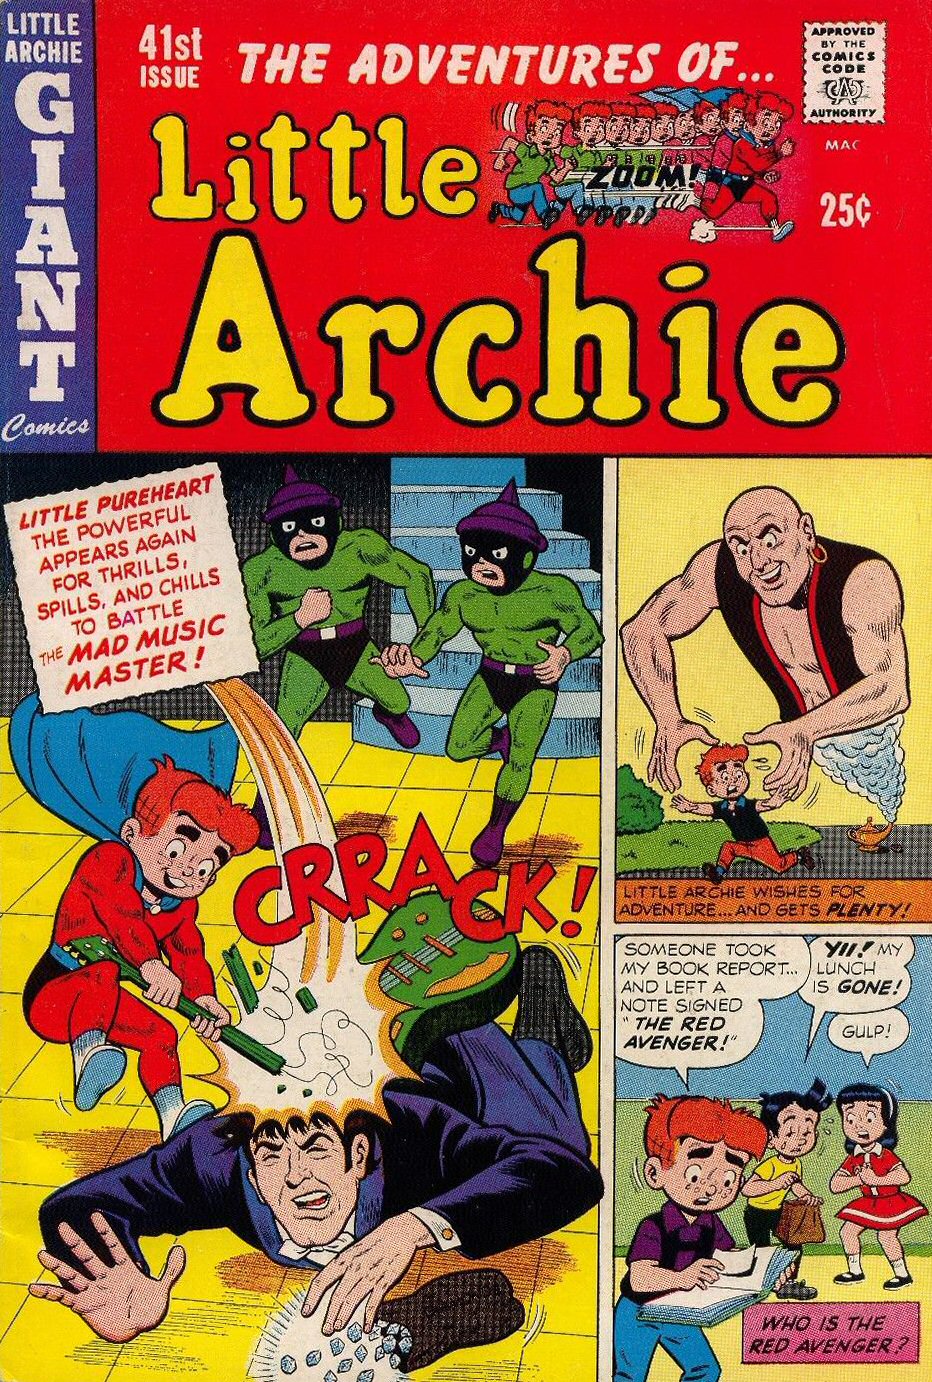 Read online The Adventures of Little Archie comic -  Issue #41 - 1